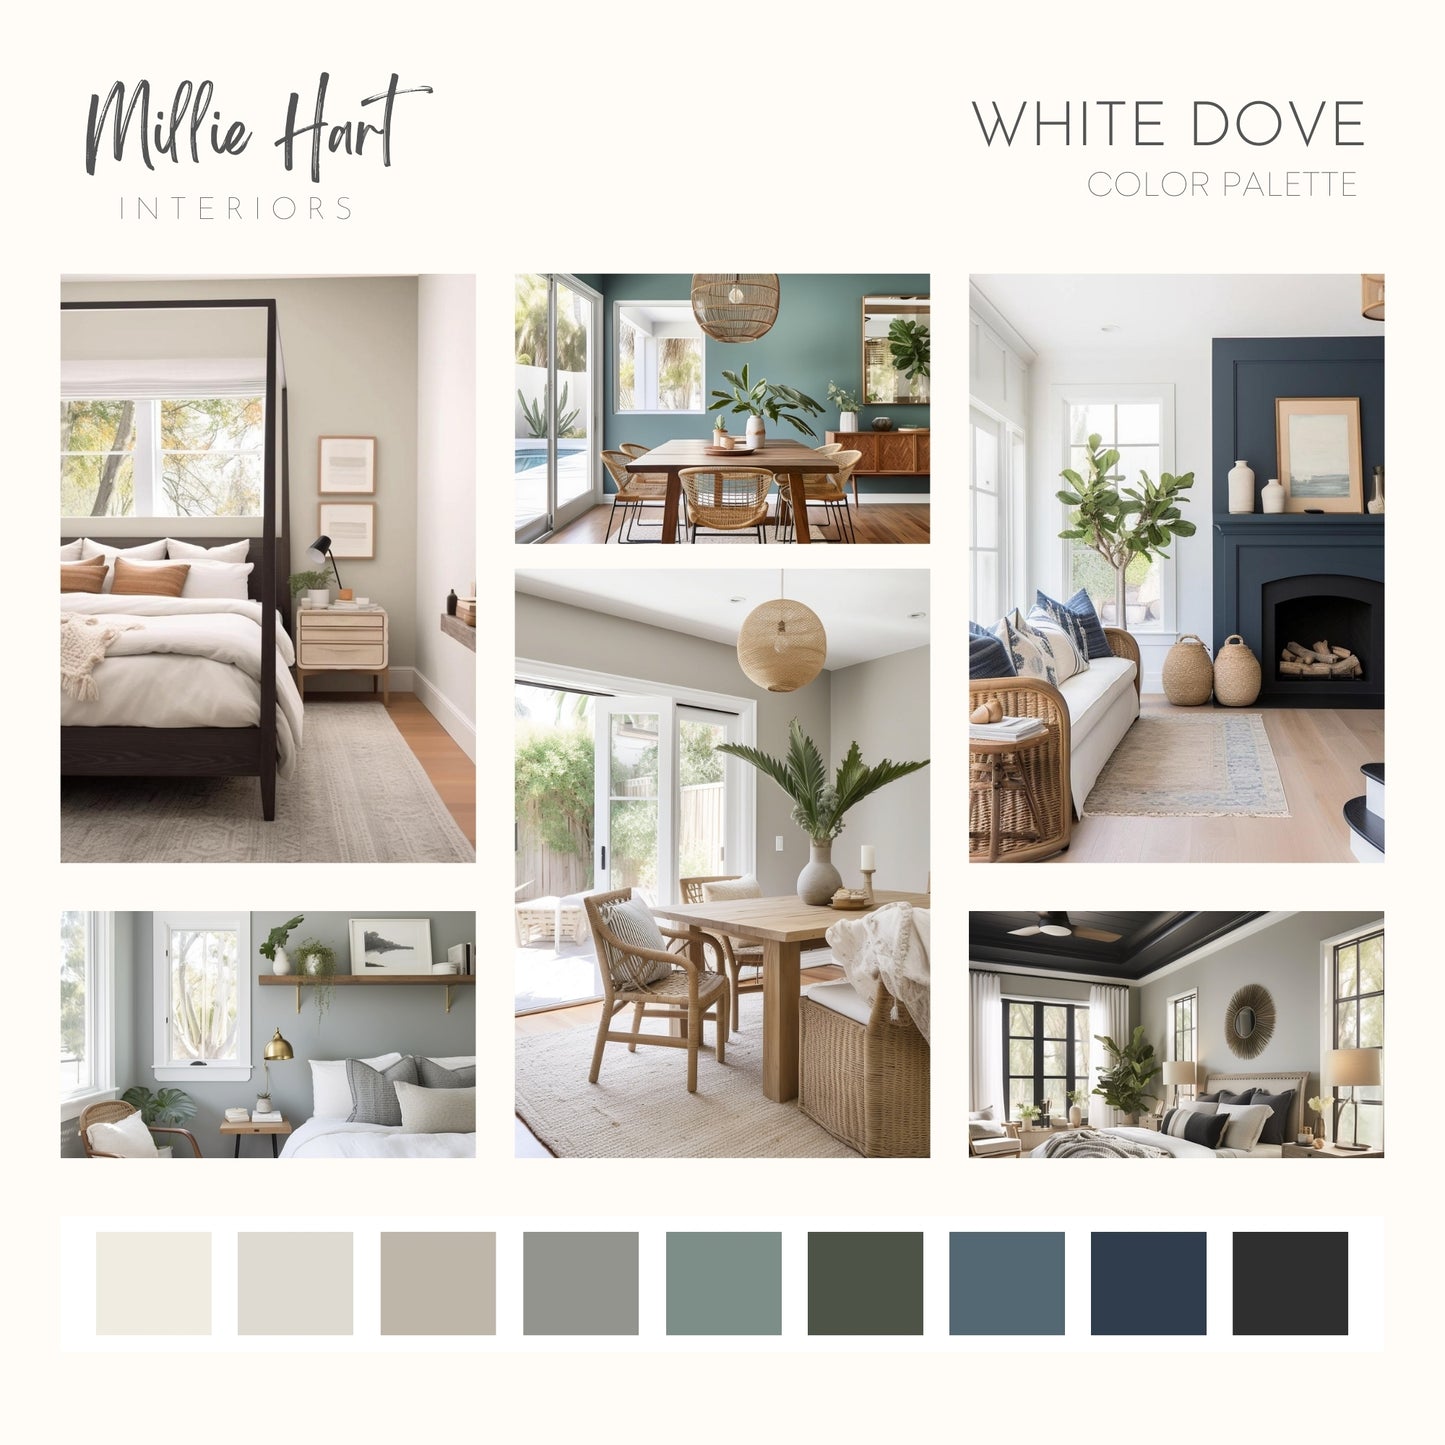 White Dove Benjamin Moore Paint Palette - Modern Neutral Interior Paint Colors for Home - Coordinating Interior Design Color Palette, Benjamin Moore White Dove